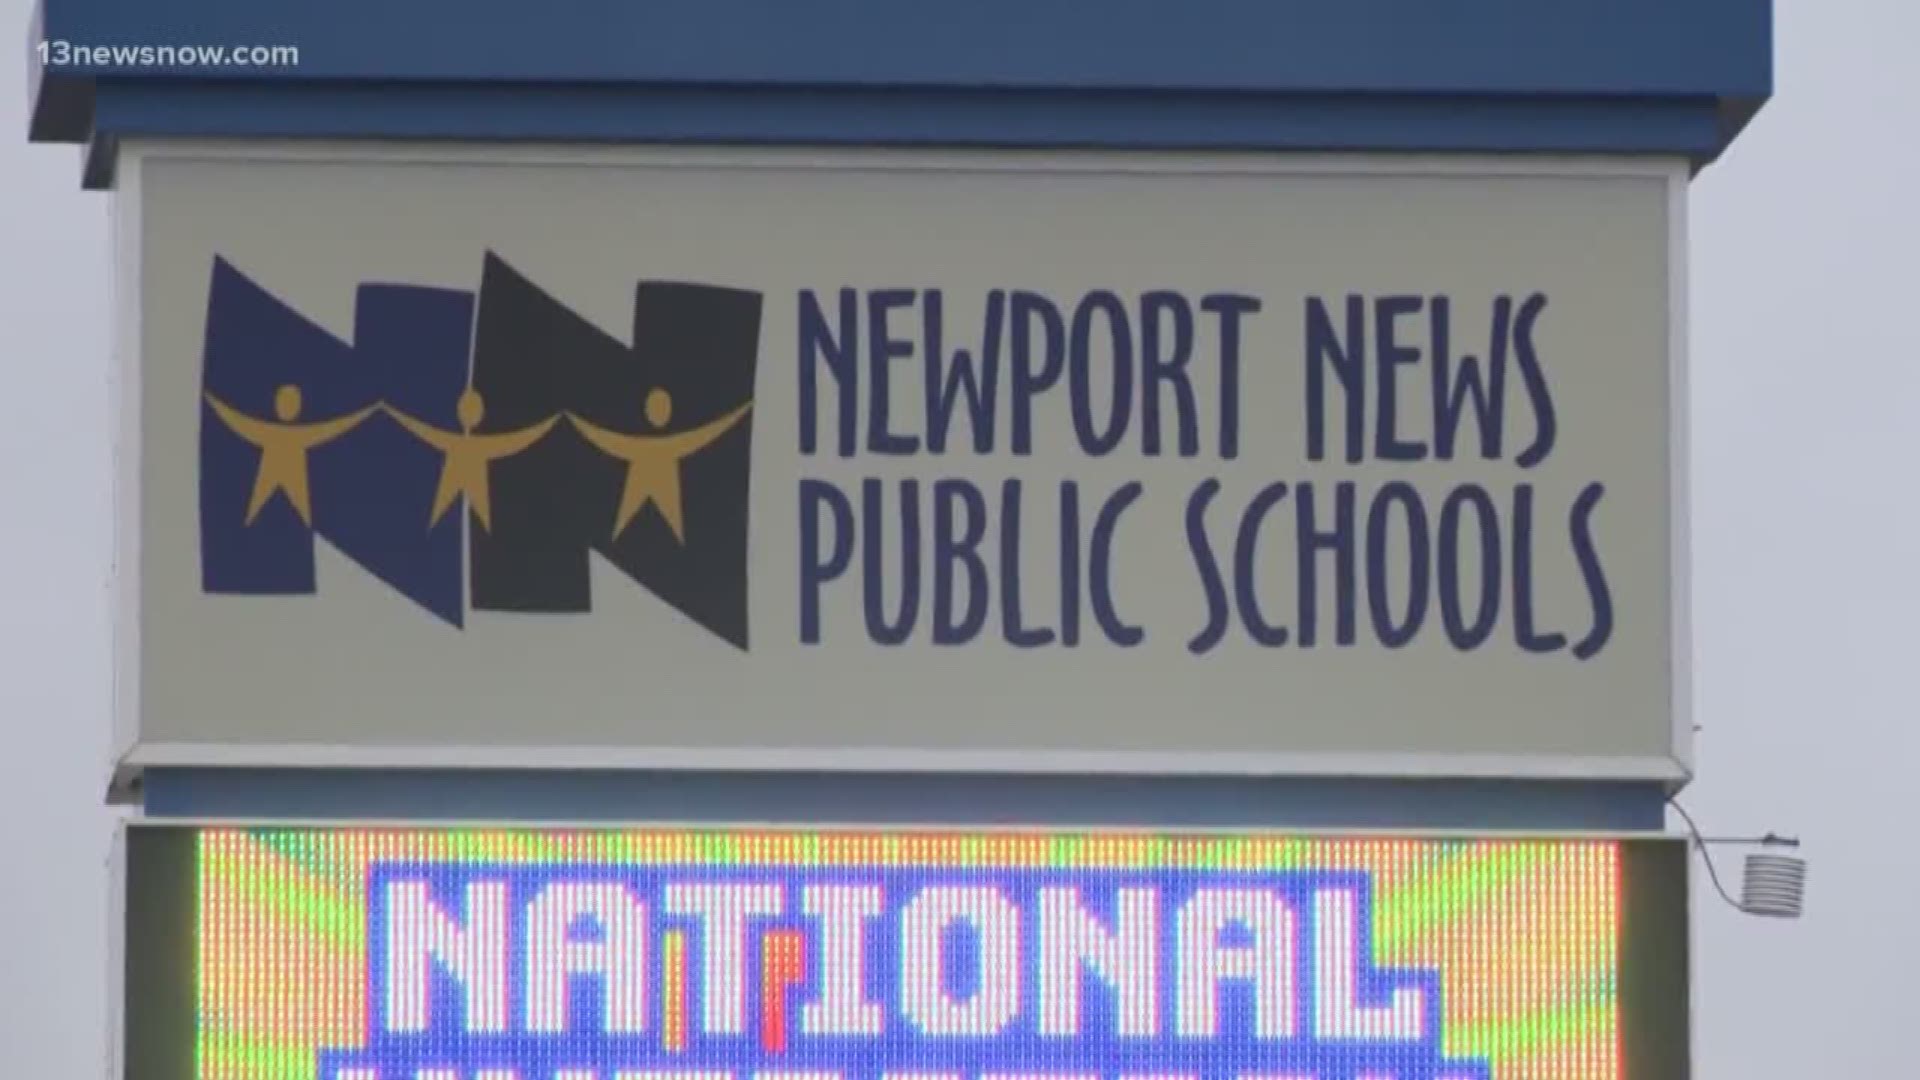 The Education Foundation is pushing on the Newport News City Council to increase funding for the schools.